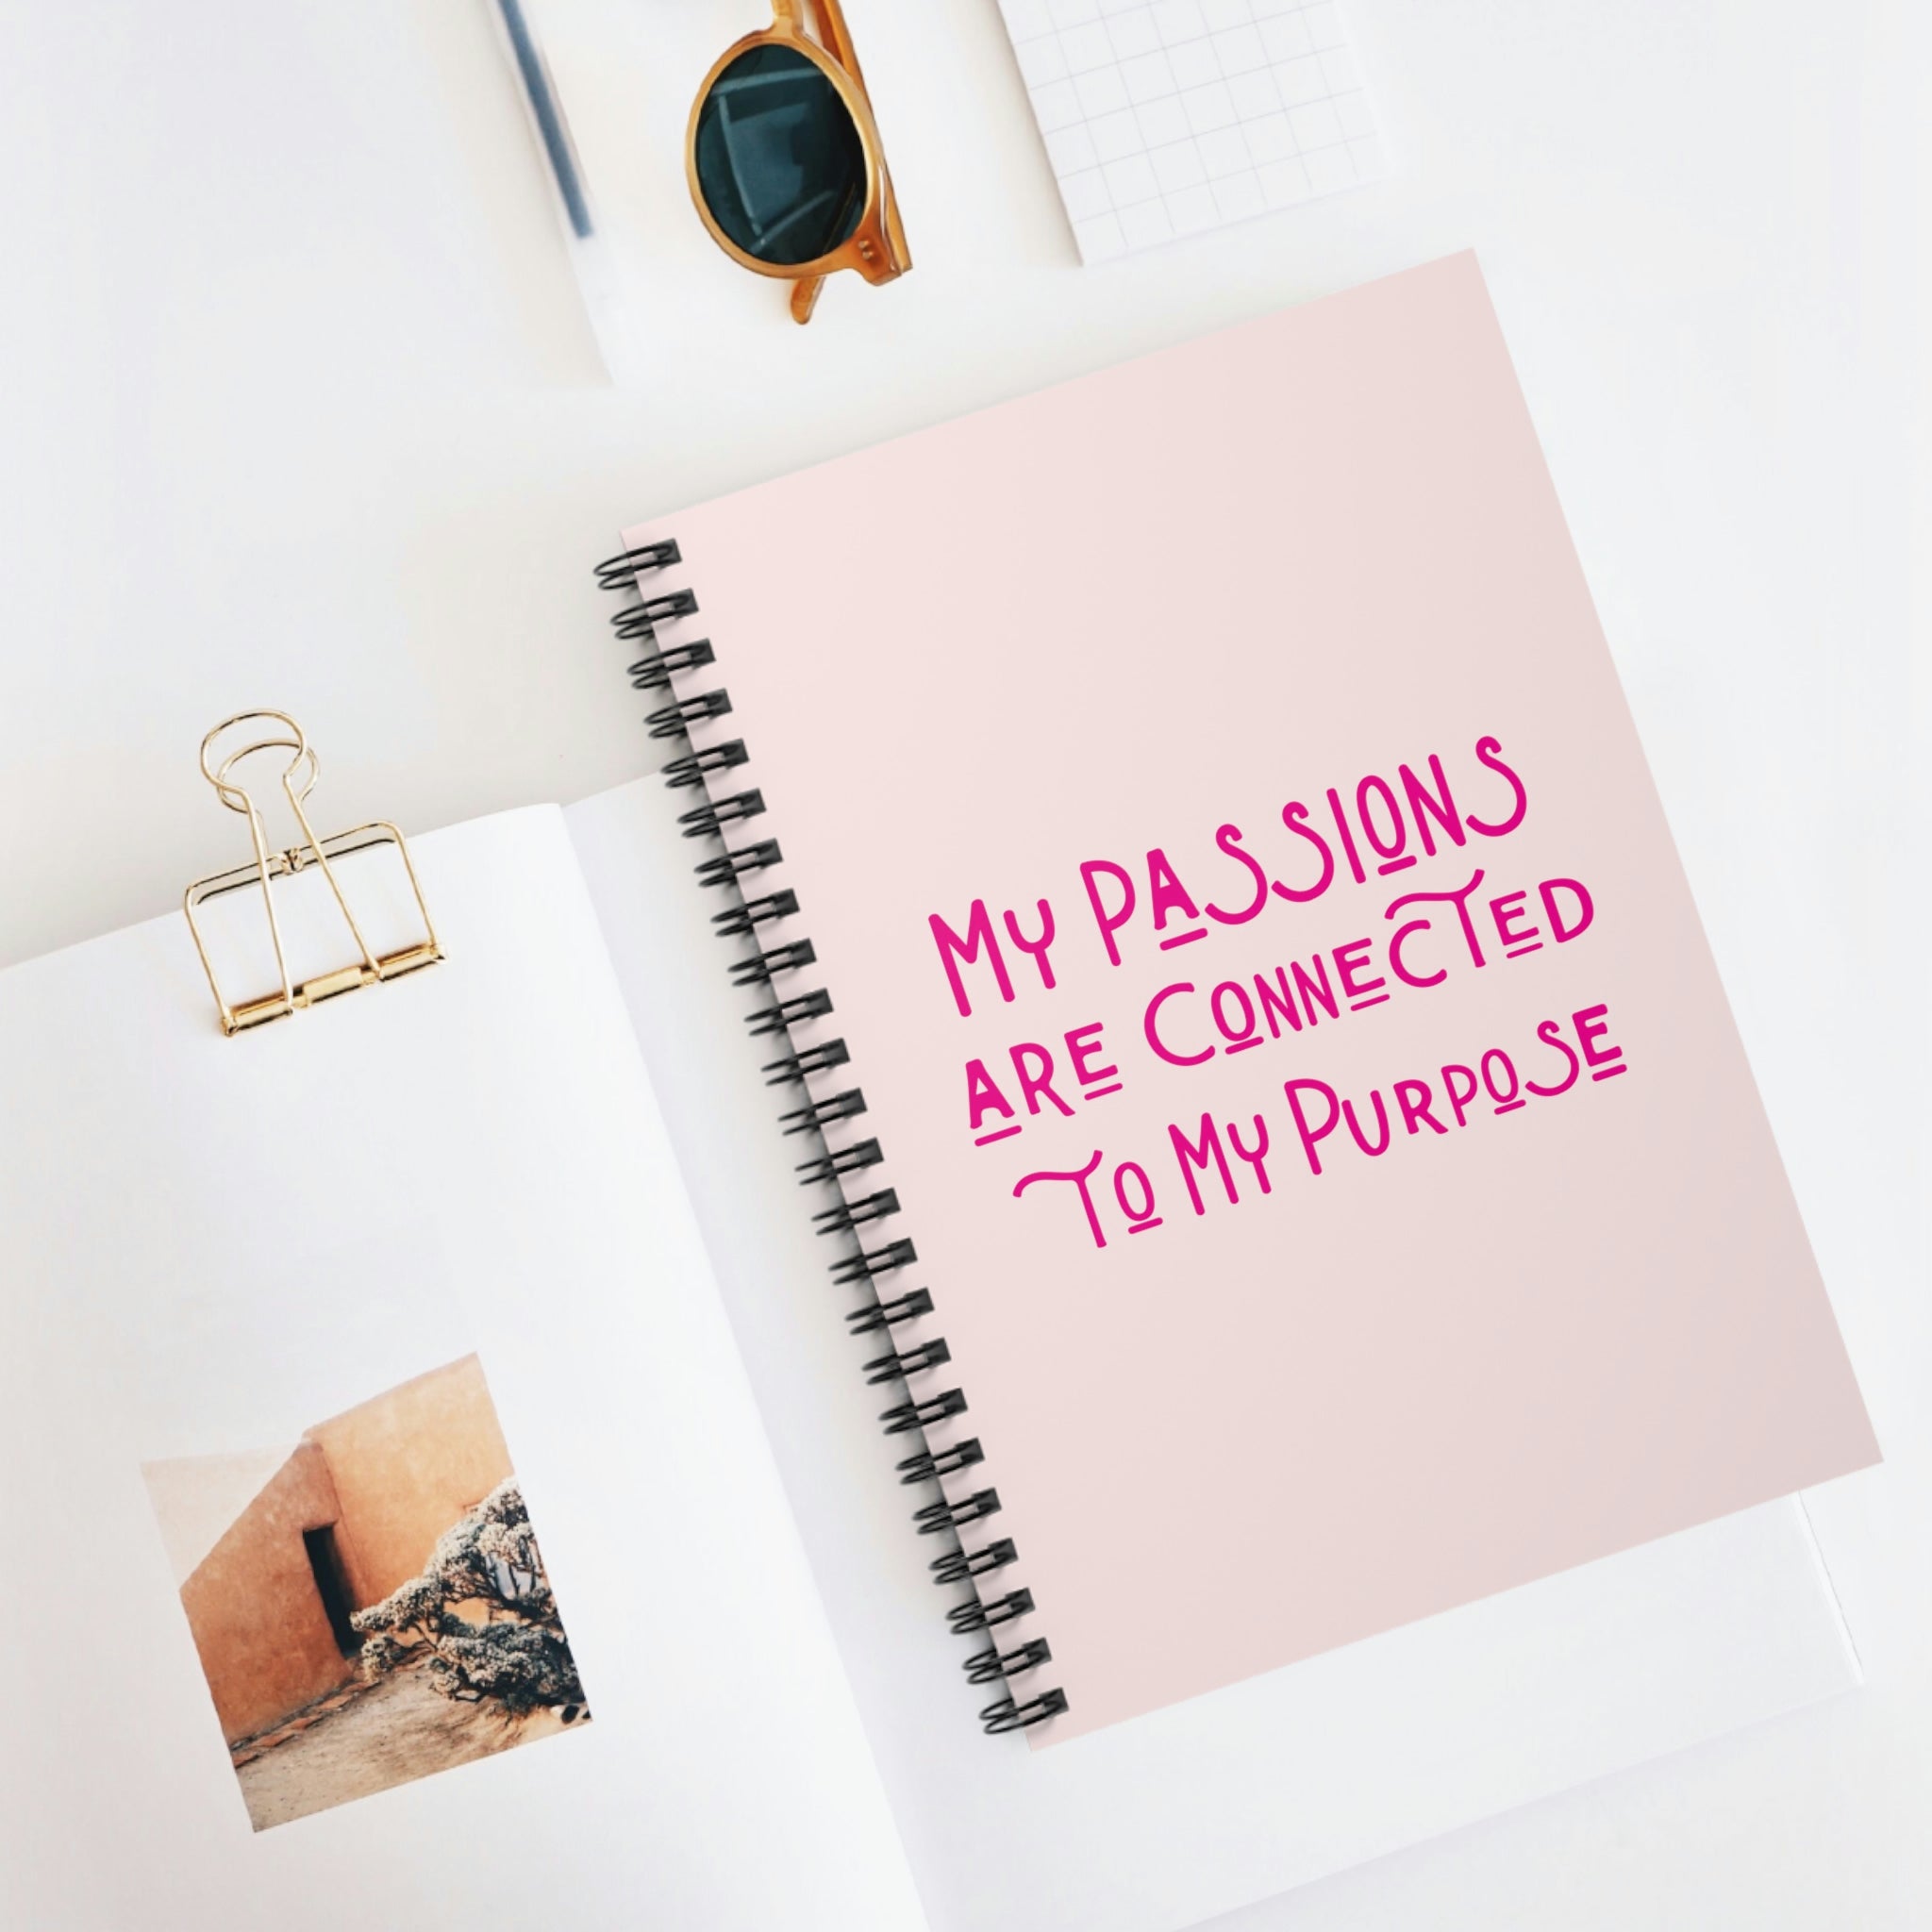 My Passions Are Connected To My Purpose Spiral Notebook